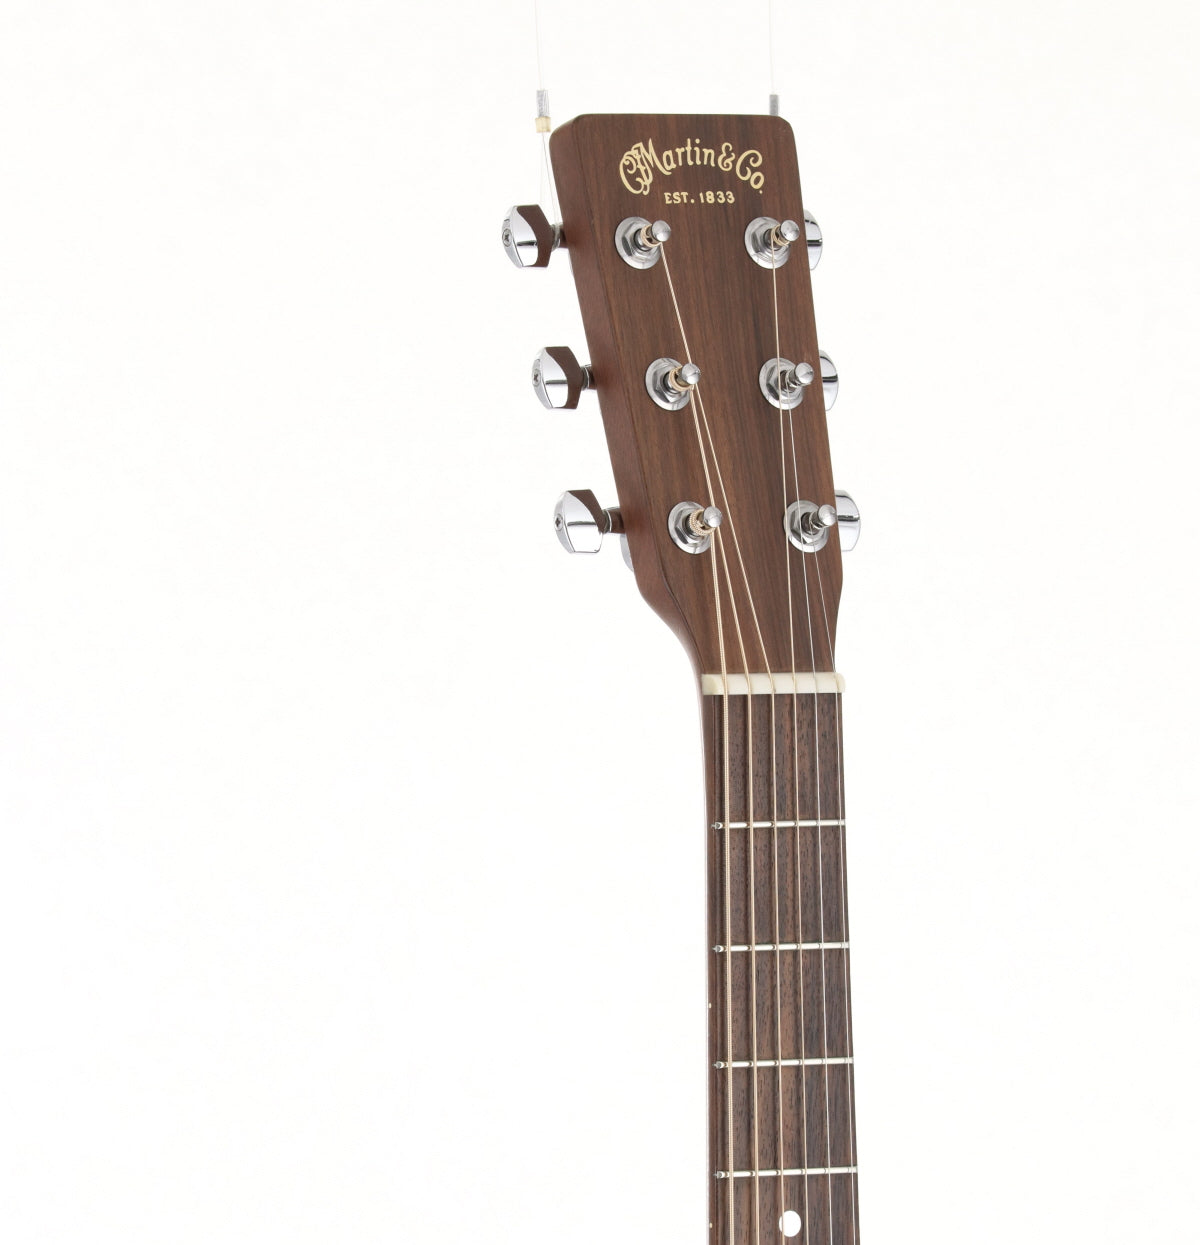 [SN 880318] USED Martin / 000-15 made in 2002 [09]